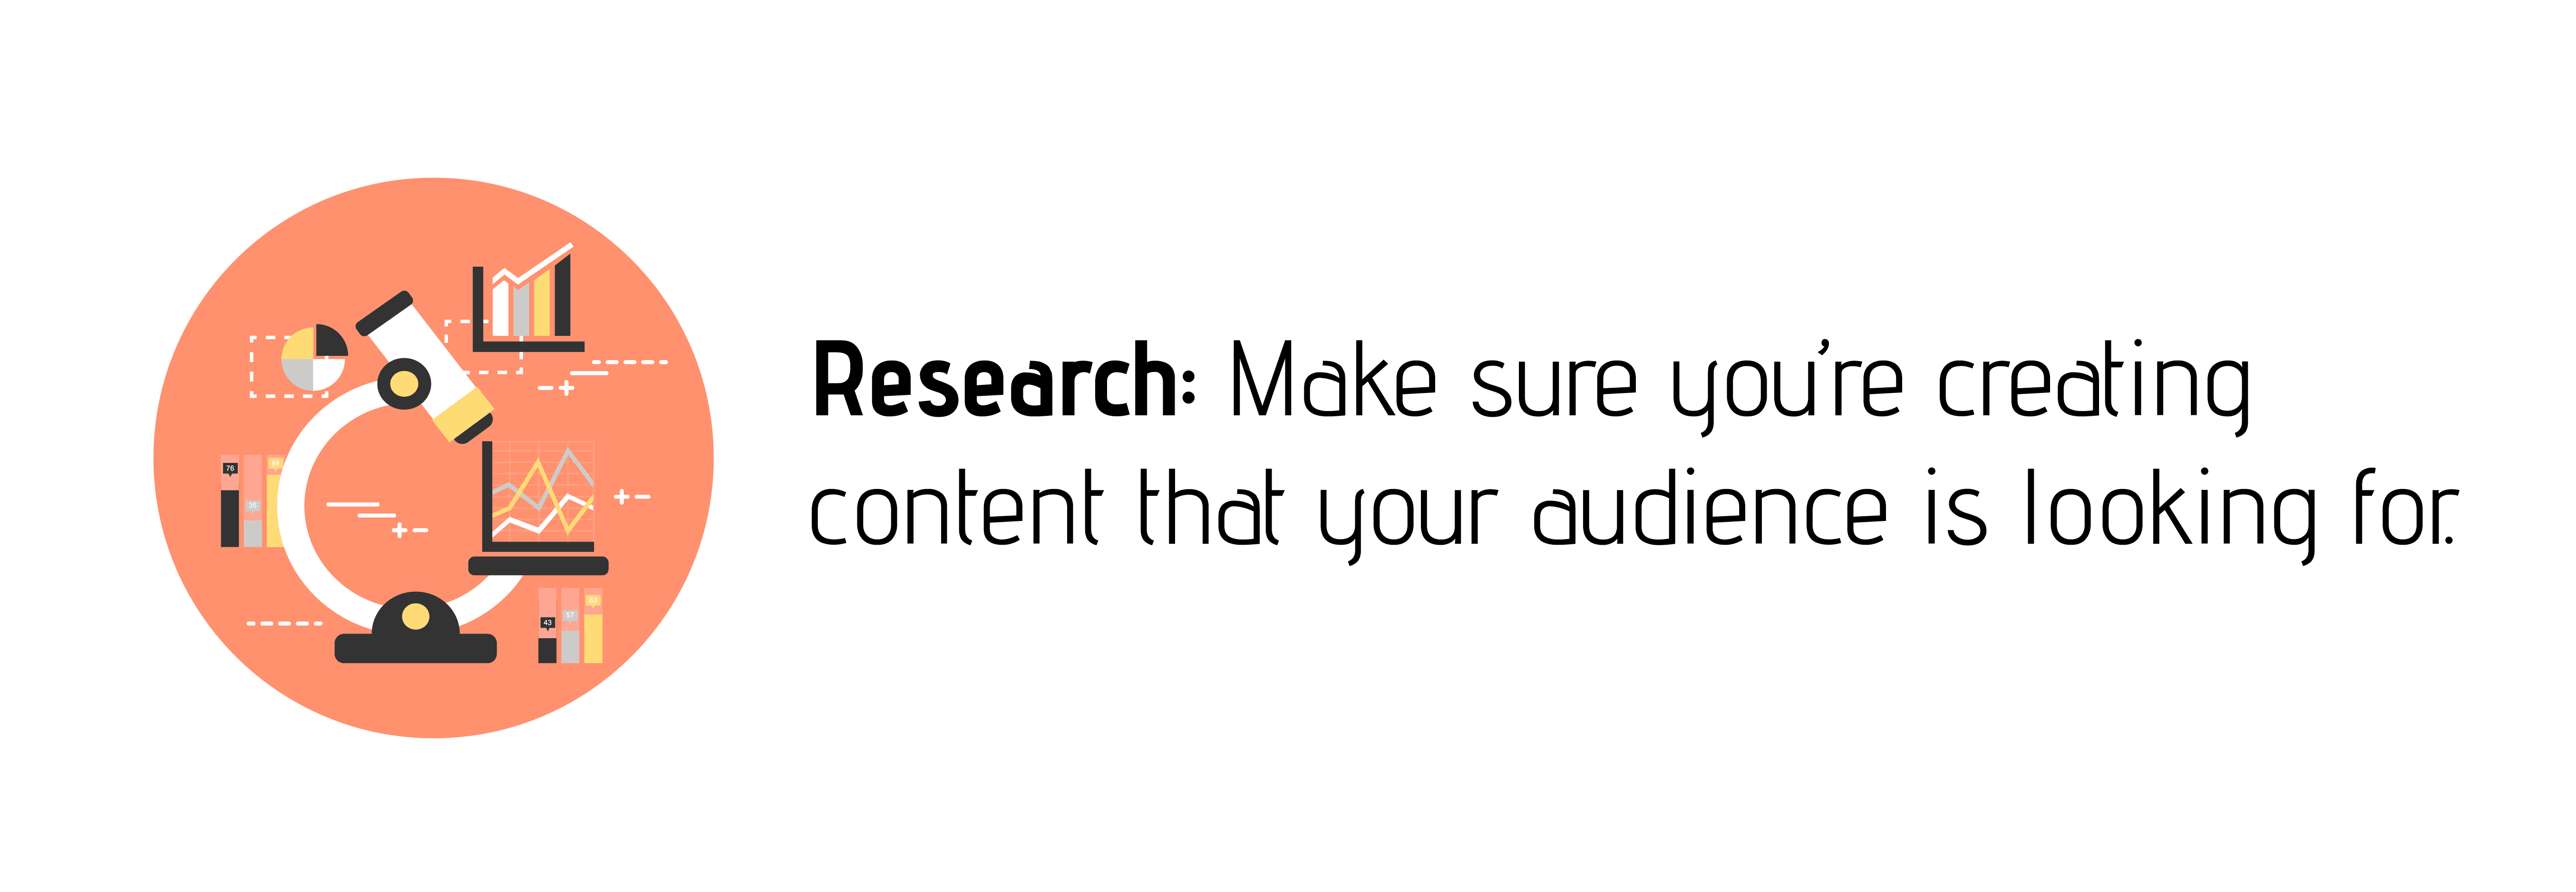 The goal of a content marketing is to create and distribute valuable content to a relevant market to attract that audience.